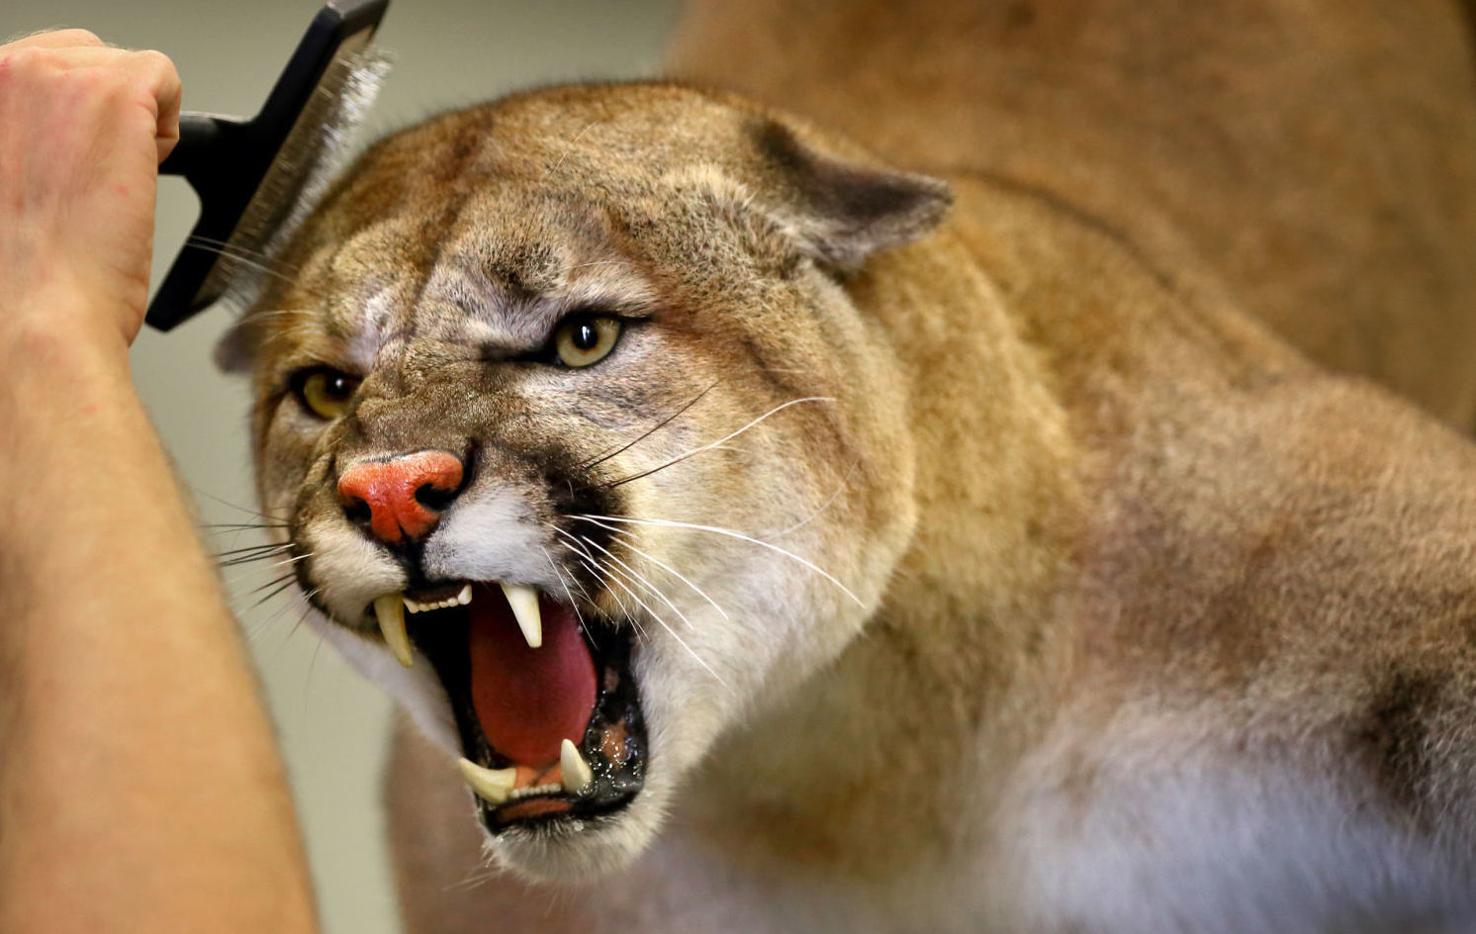 The 'Olympics of taxidermy' comes to Missouri